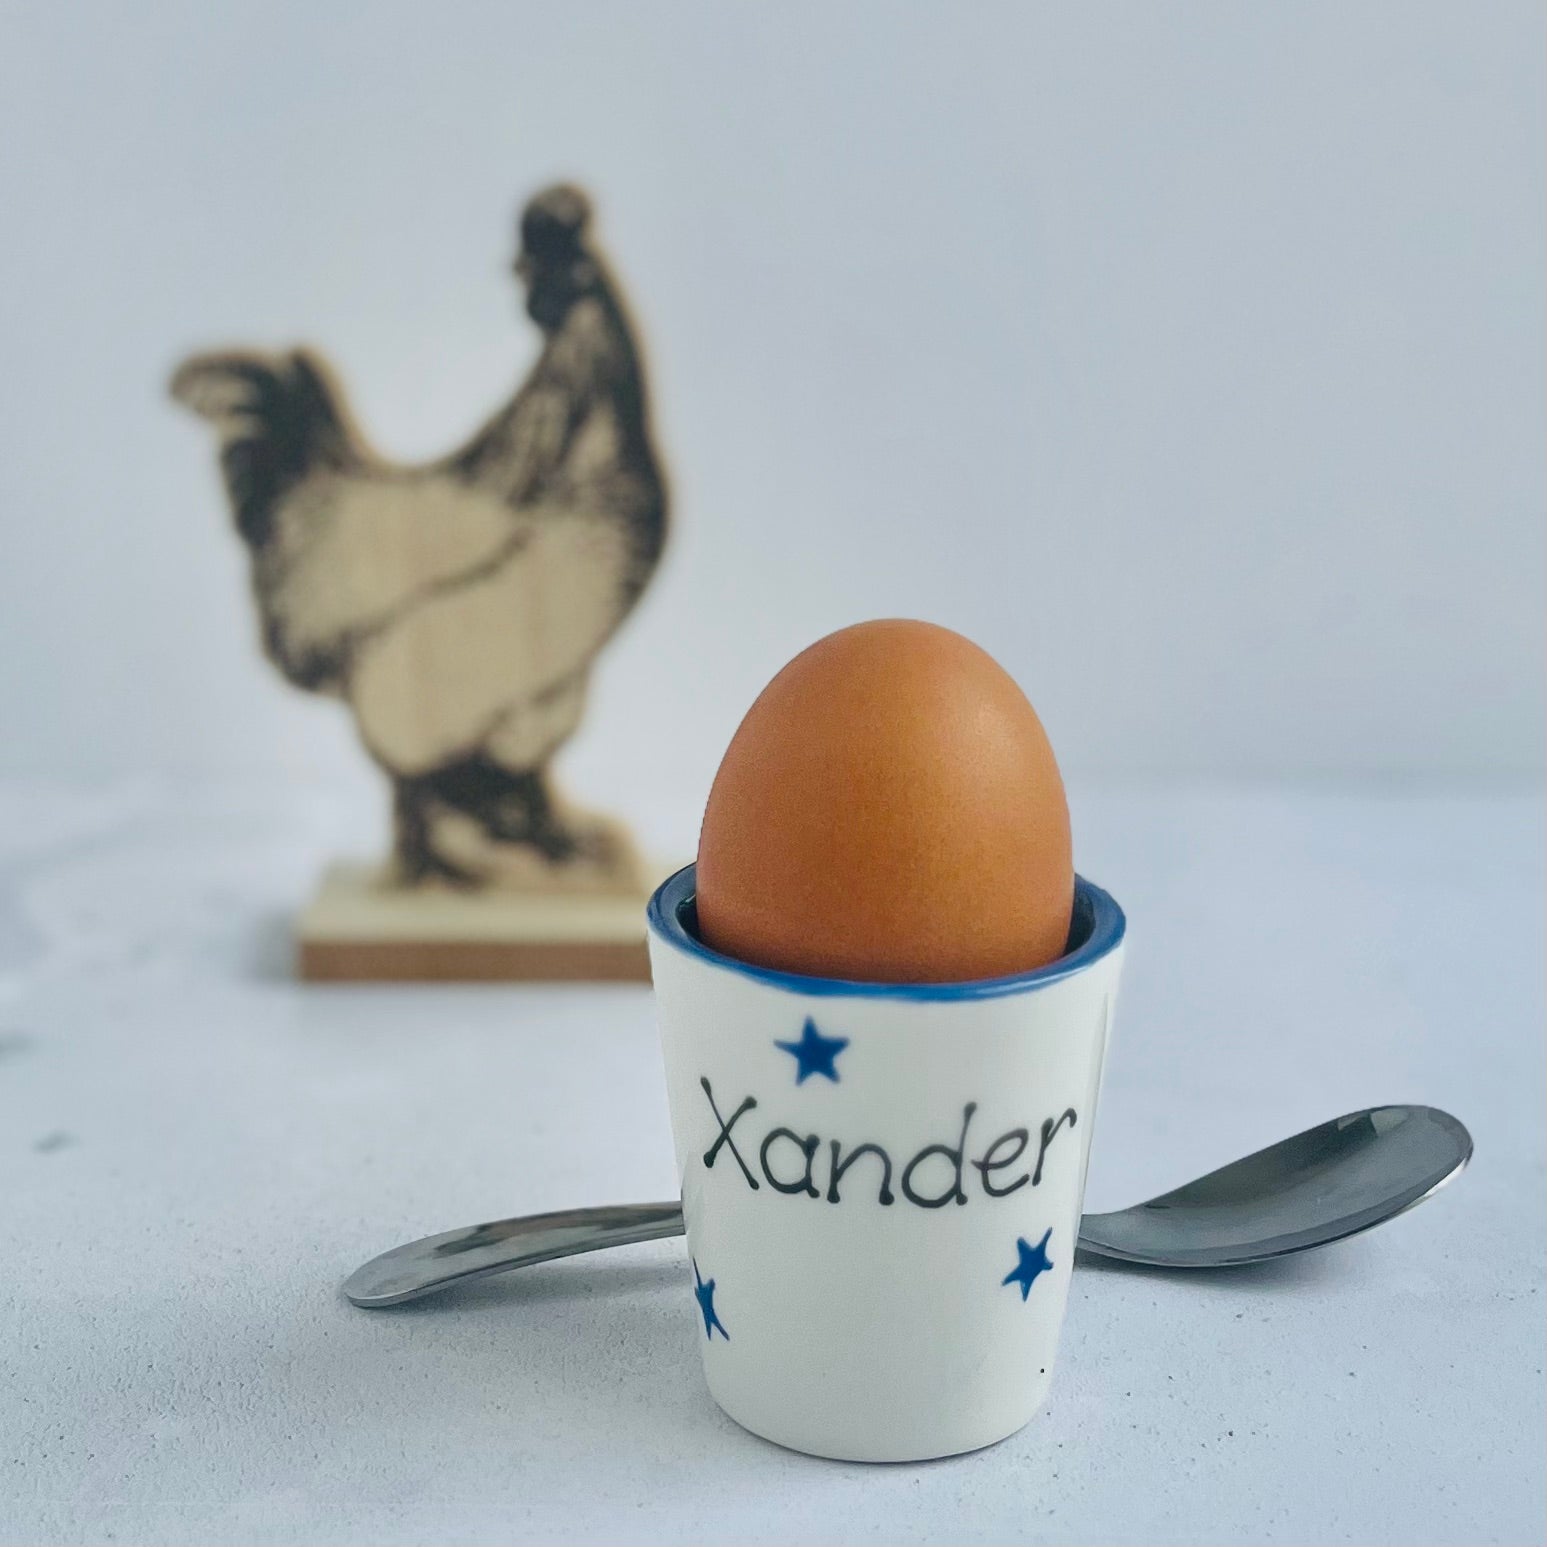 Personalised Spotty Dotty Straight Side Egg Cup